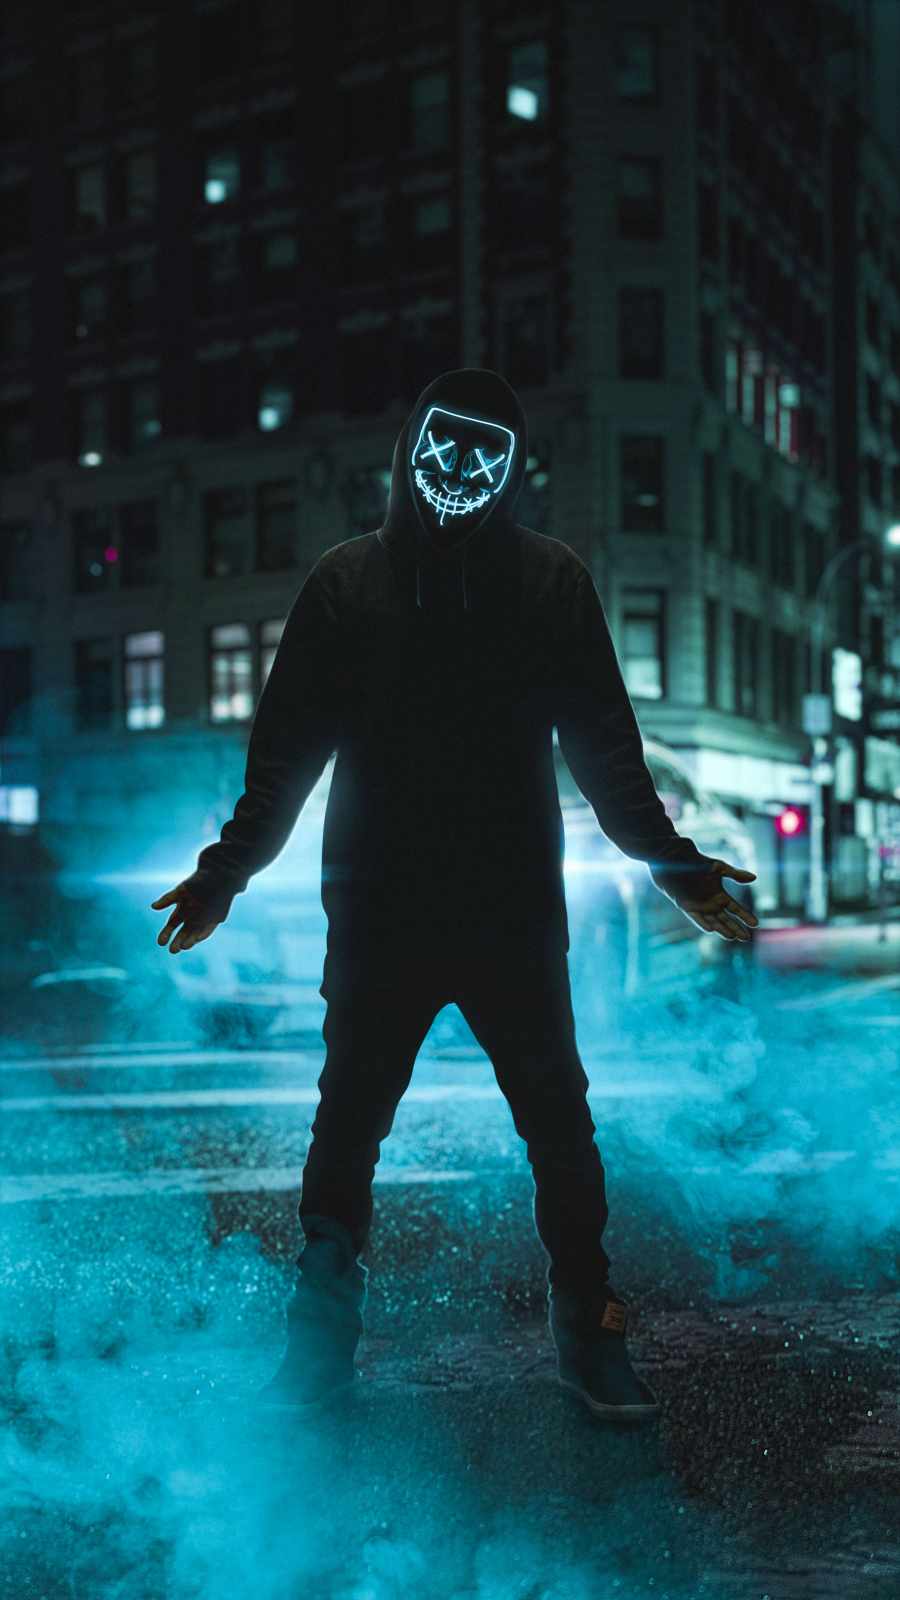 Neon Stitich Mask Hoodie Guy iPhone Wallpaper